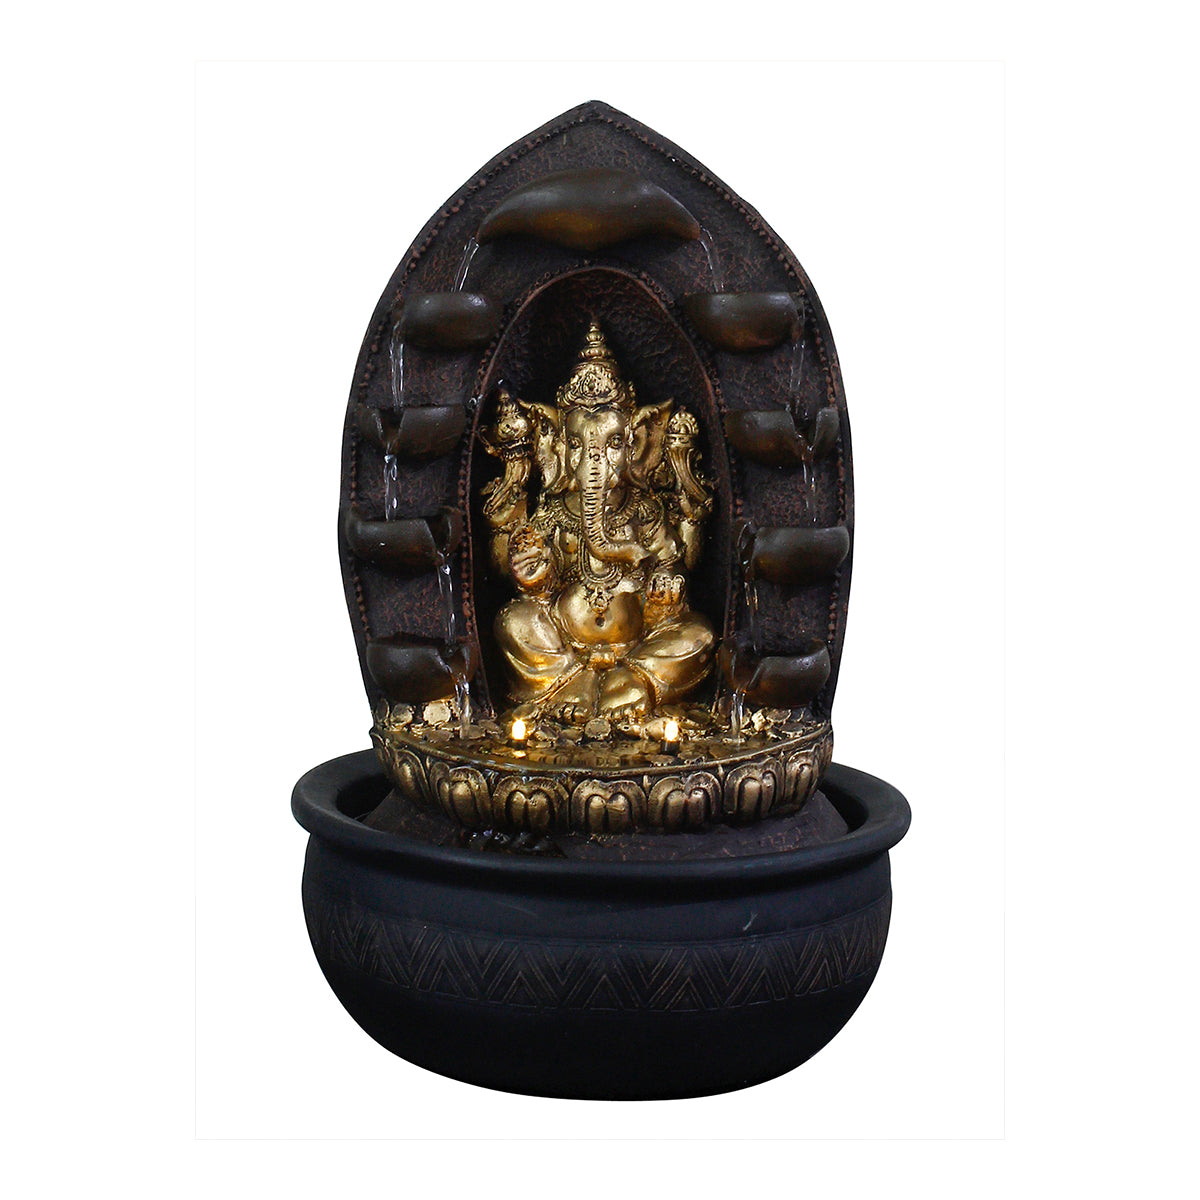 Polystone Black and Golden Decorative Lord Ganesha Statue Water Fountain With Light For Home/Office Décor 1